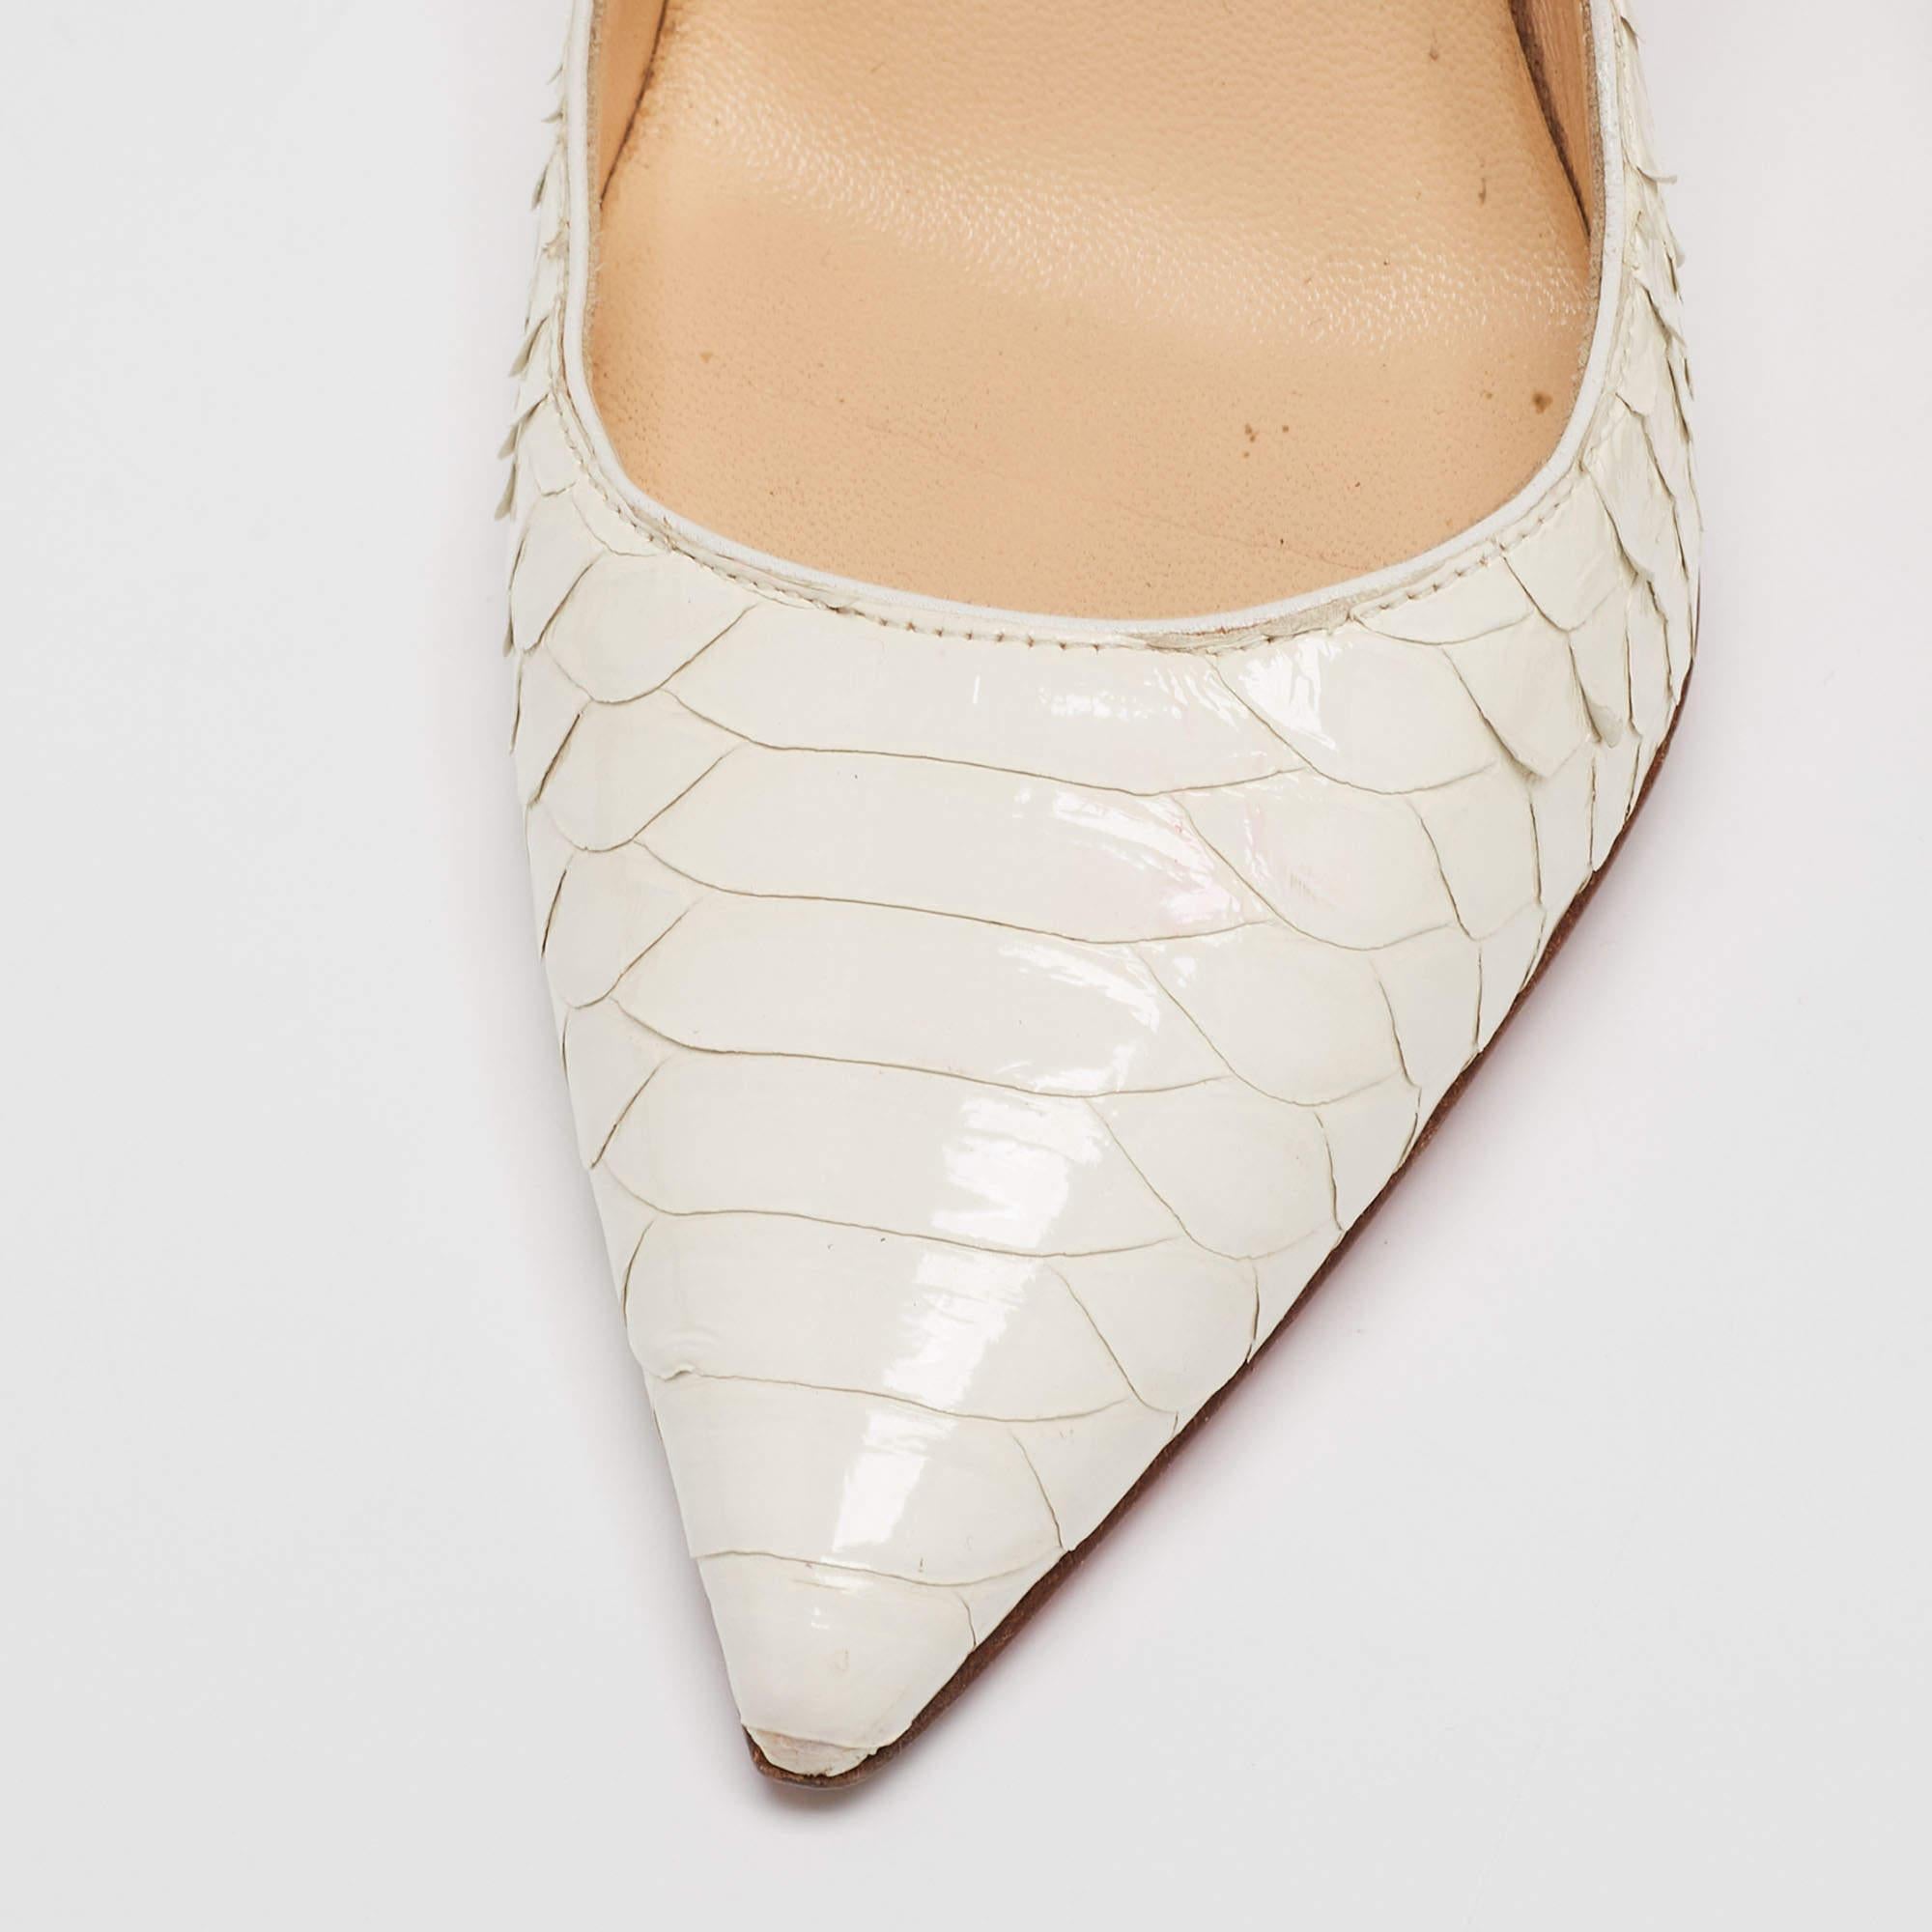 Christian Louboutin White Python Patent Leather So Kate Pumps Size 37.5 For Sale 3